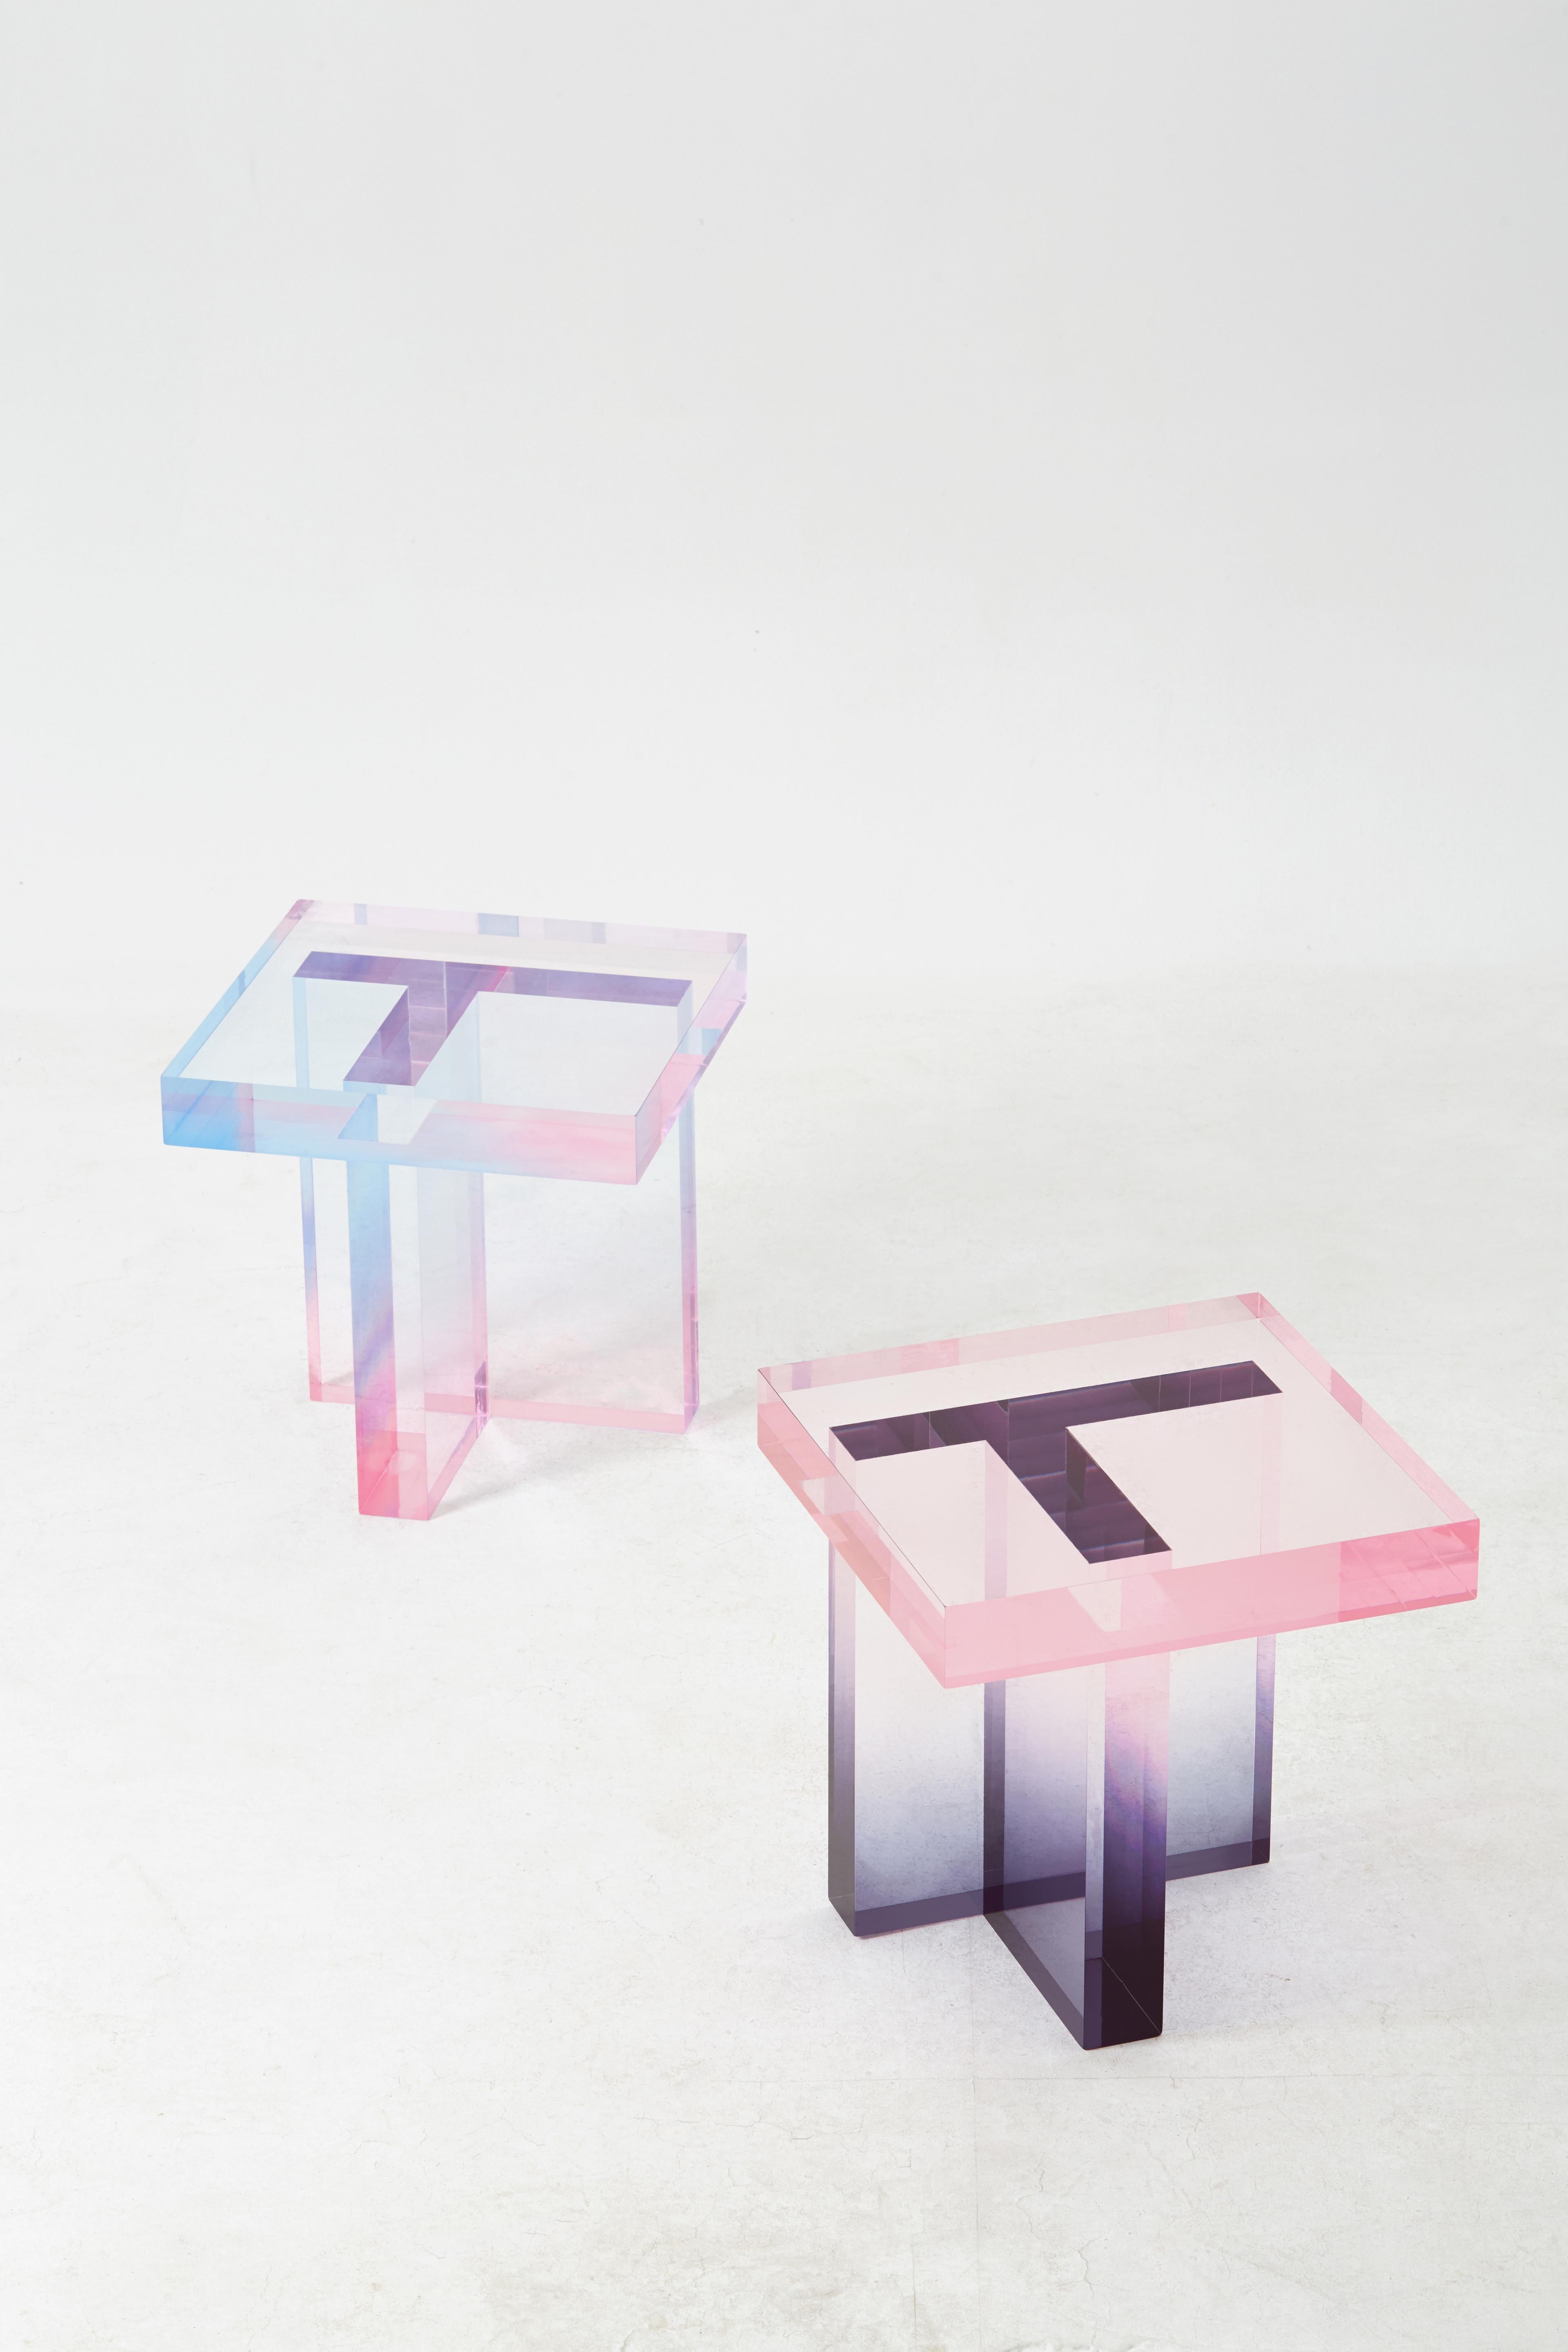 Crystal Series Table 01 Acrylic in Transparent Pink and Blue Customized For Sale 2